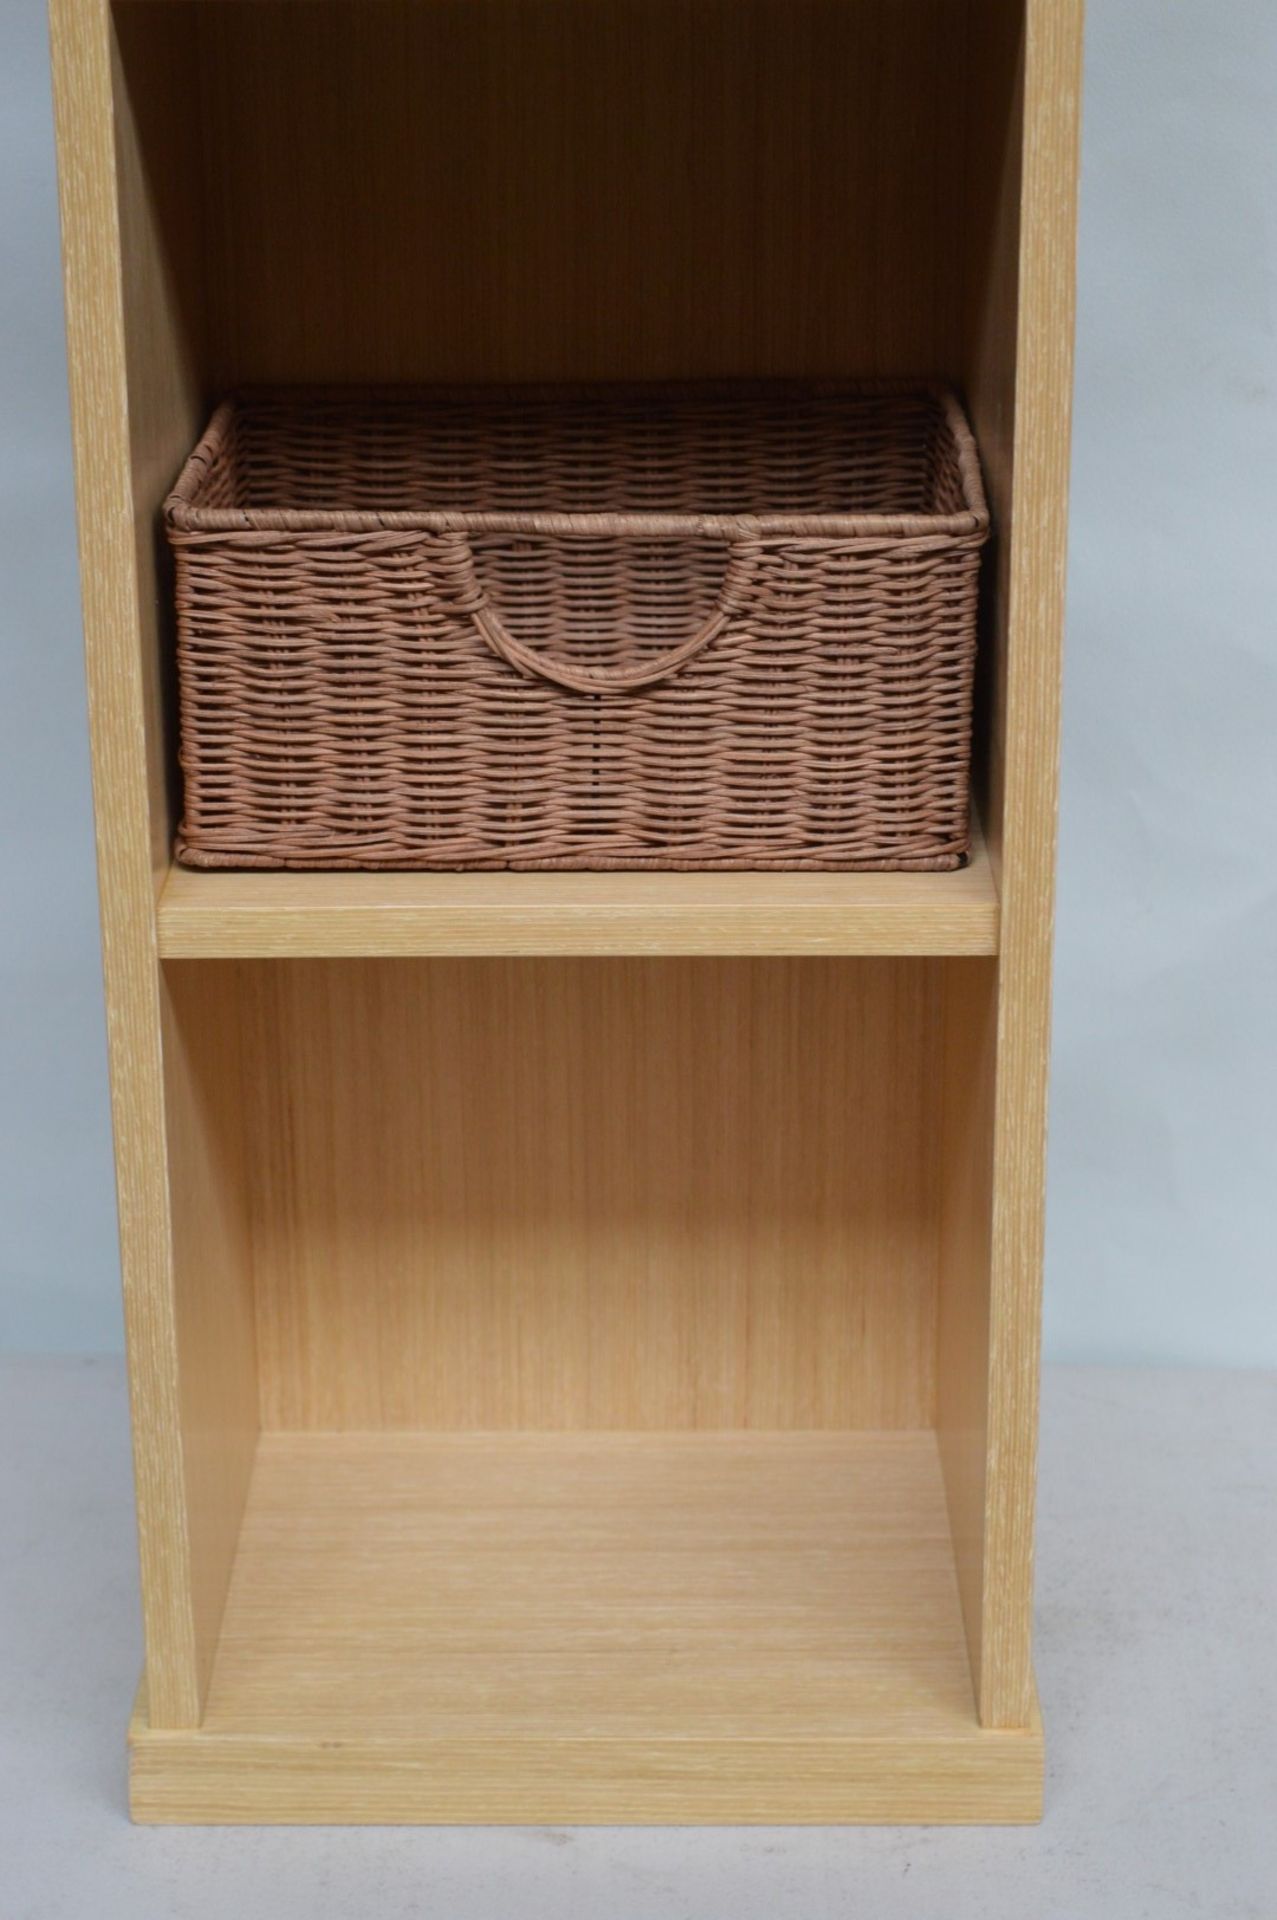 1 x Vogue ARC Series 2 Bathroom Storage Shelving Unit - Wall Mounted or Floor Standing - OAK - Image 3 of 9